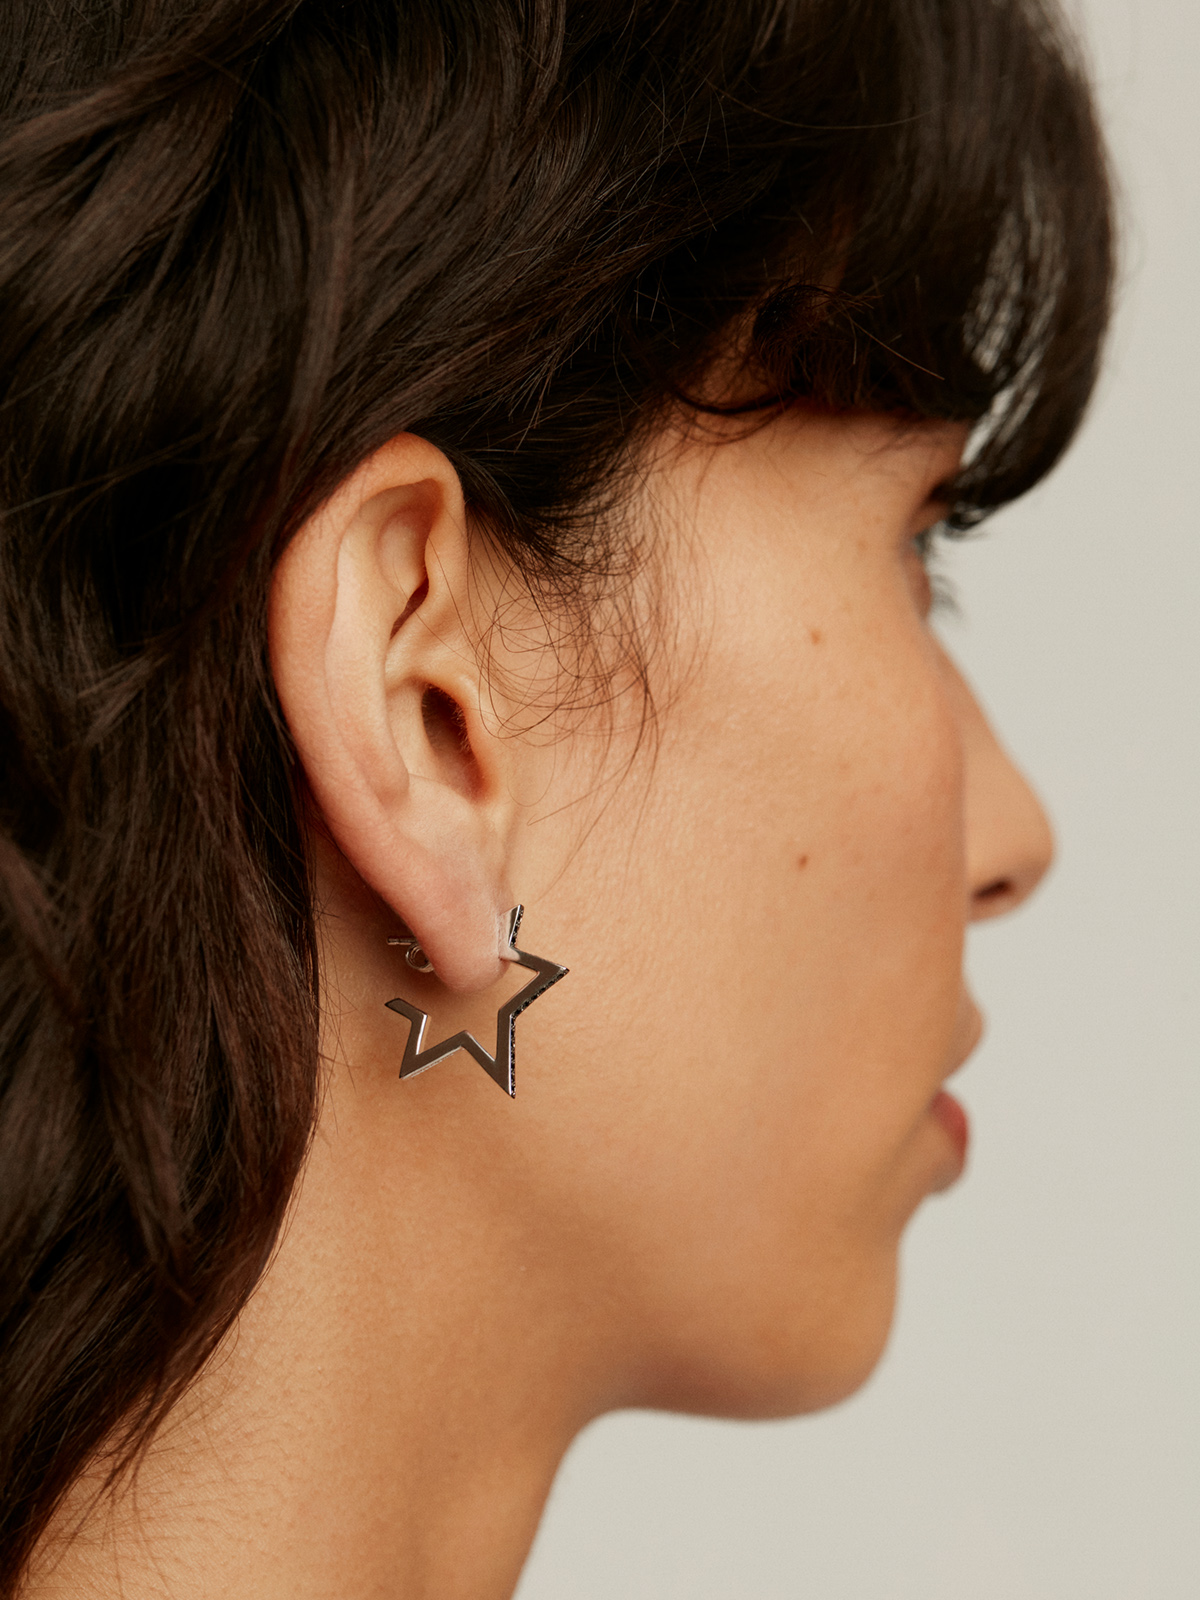 925 Silver earrings in the shape of a star with black spinels.